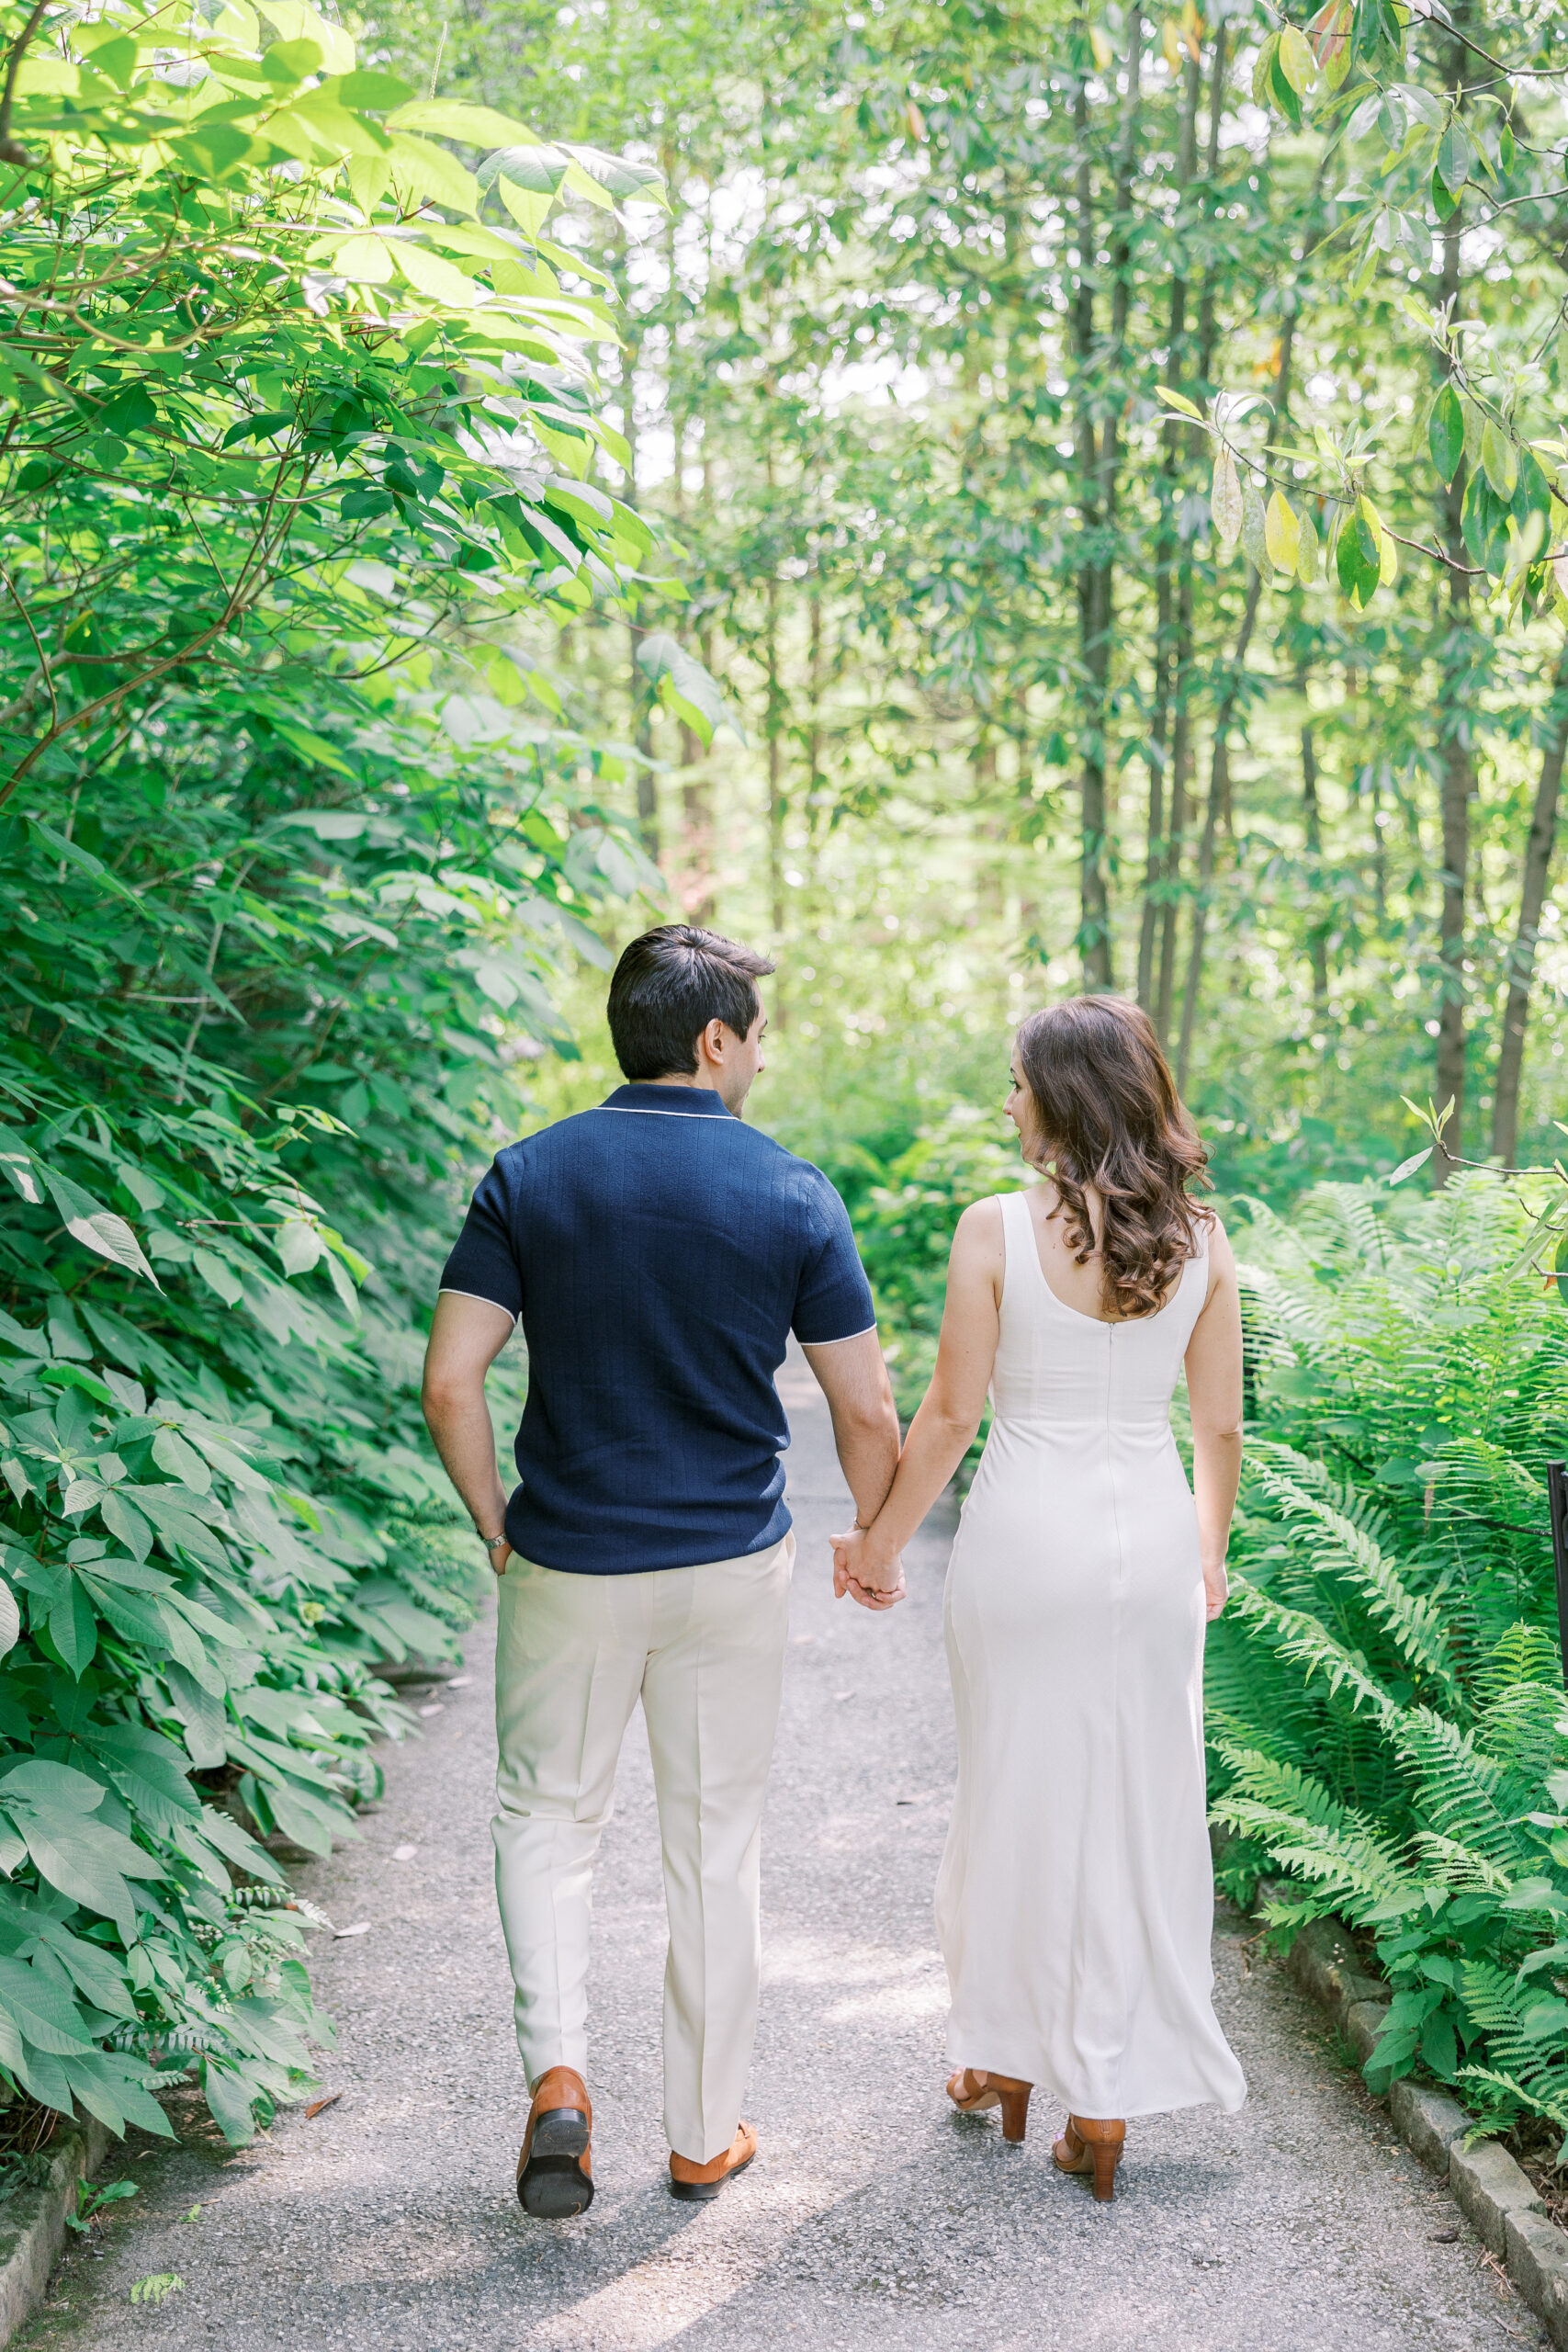 Spring Longwood Gardens Engagement Session shot on film by destination wedding photographer Katie Trauffer - couple walks away hand in hand on sunny tree lined path through dense foliage